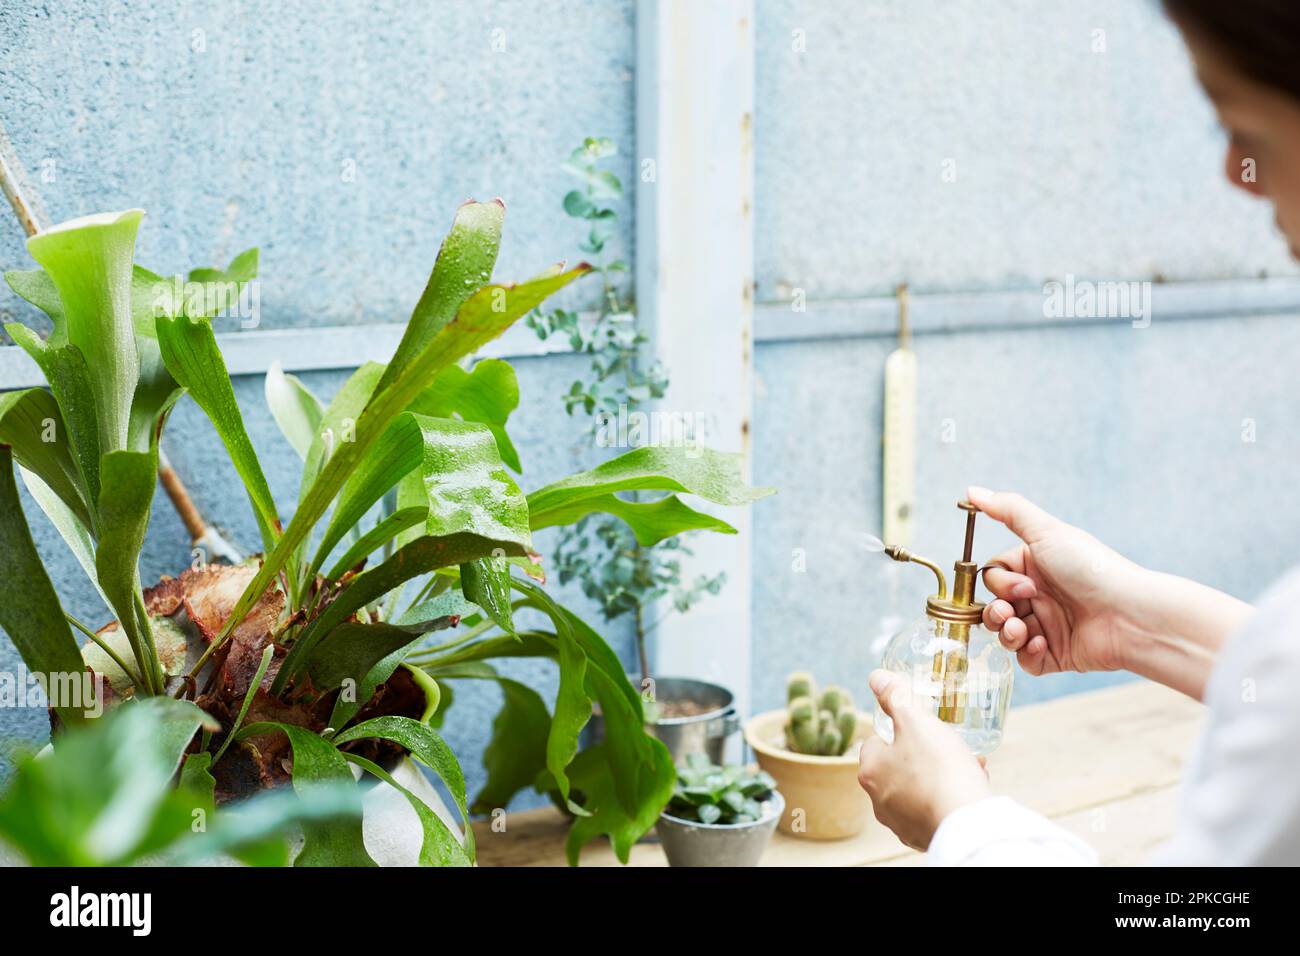 Woman's hand misting a plant Stock Photo